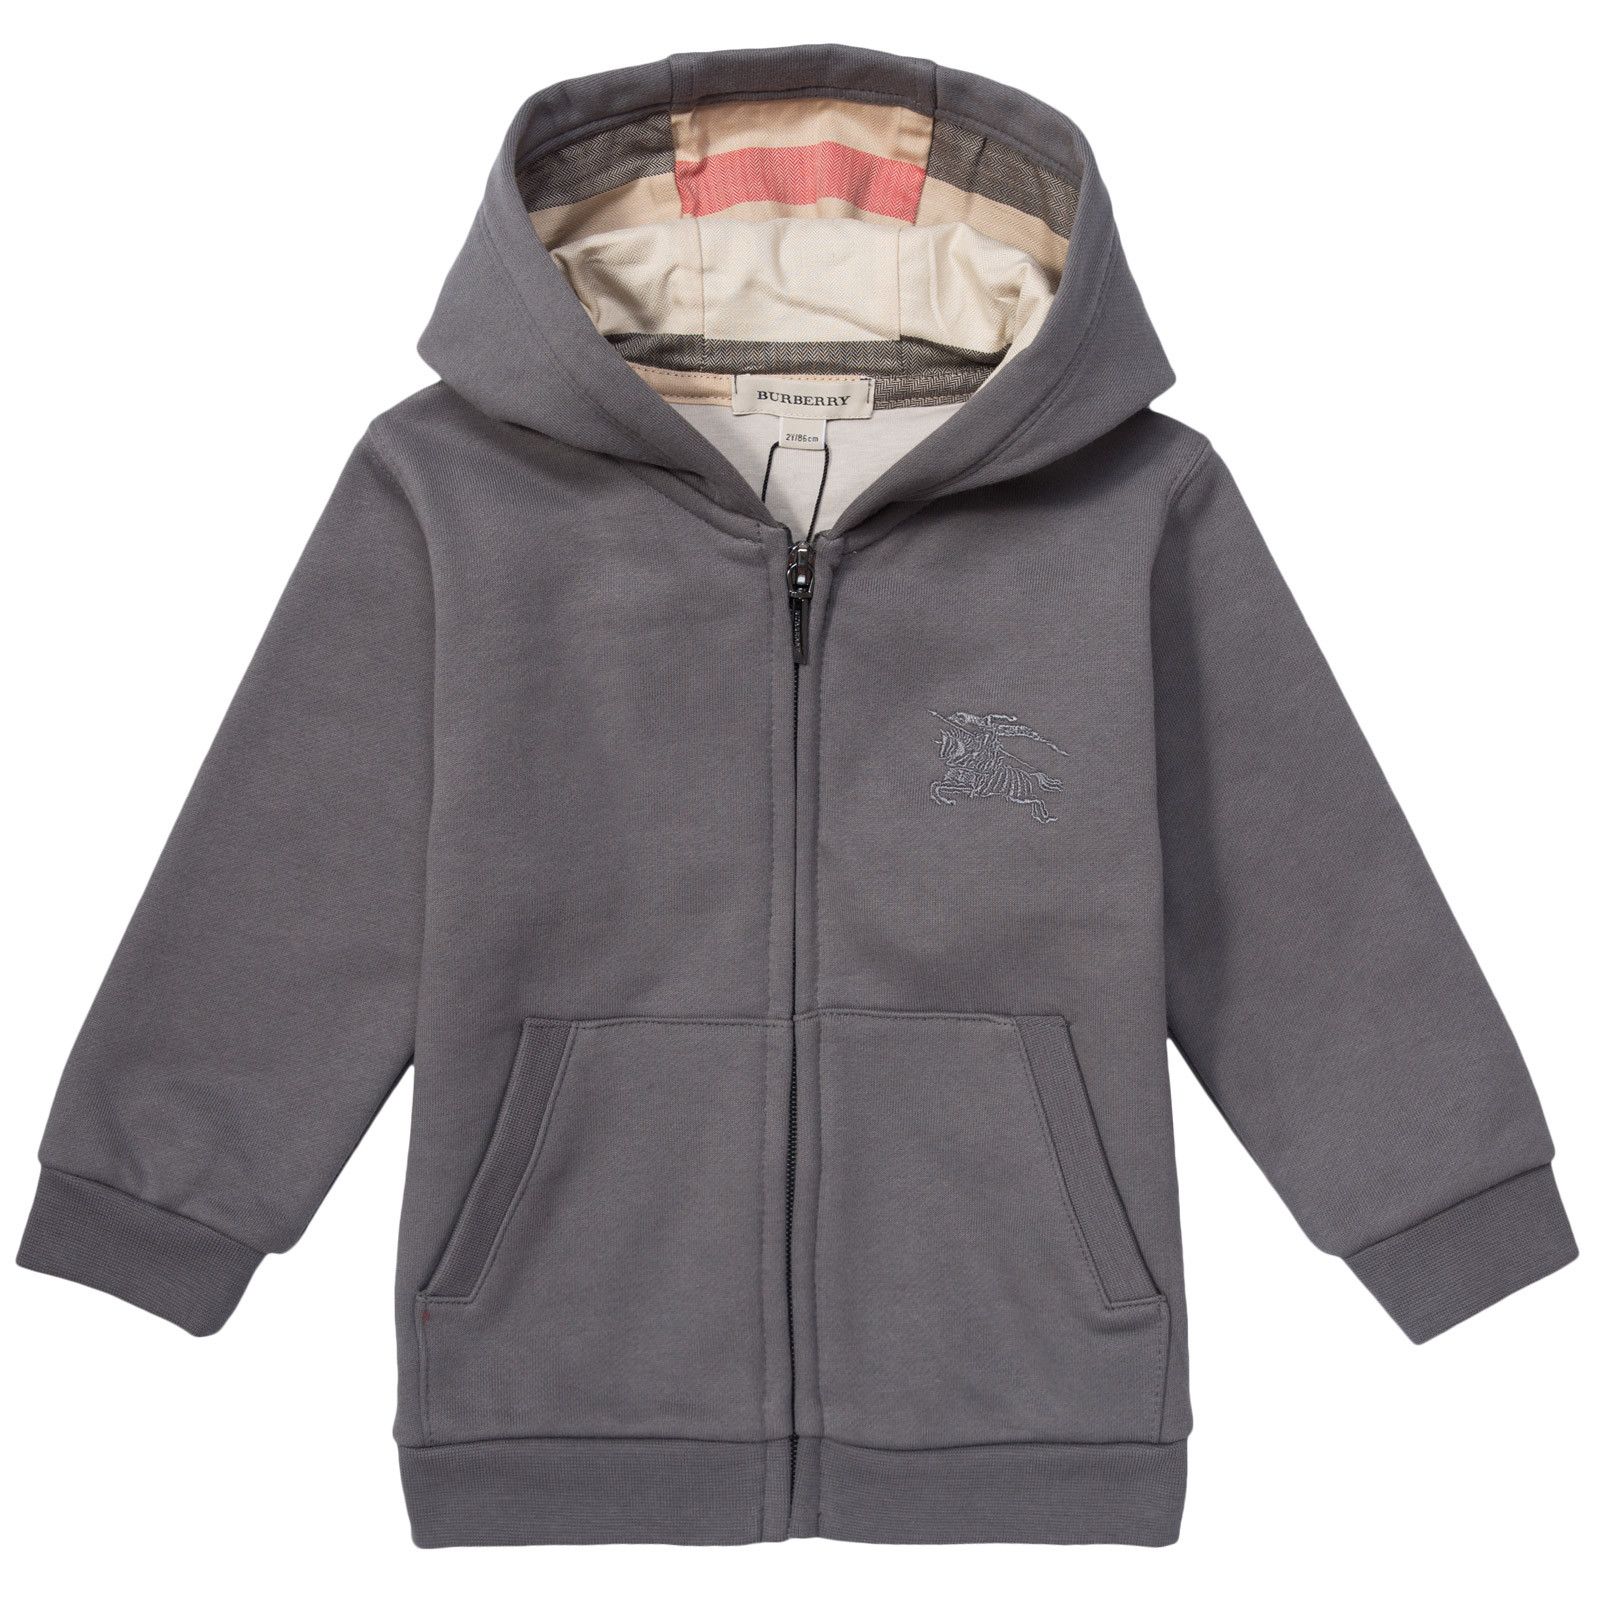 Boys Grey Tracksuit With Check Lined Hood - CÉMAROSE | Children's Fashion Store - 5